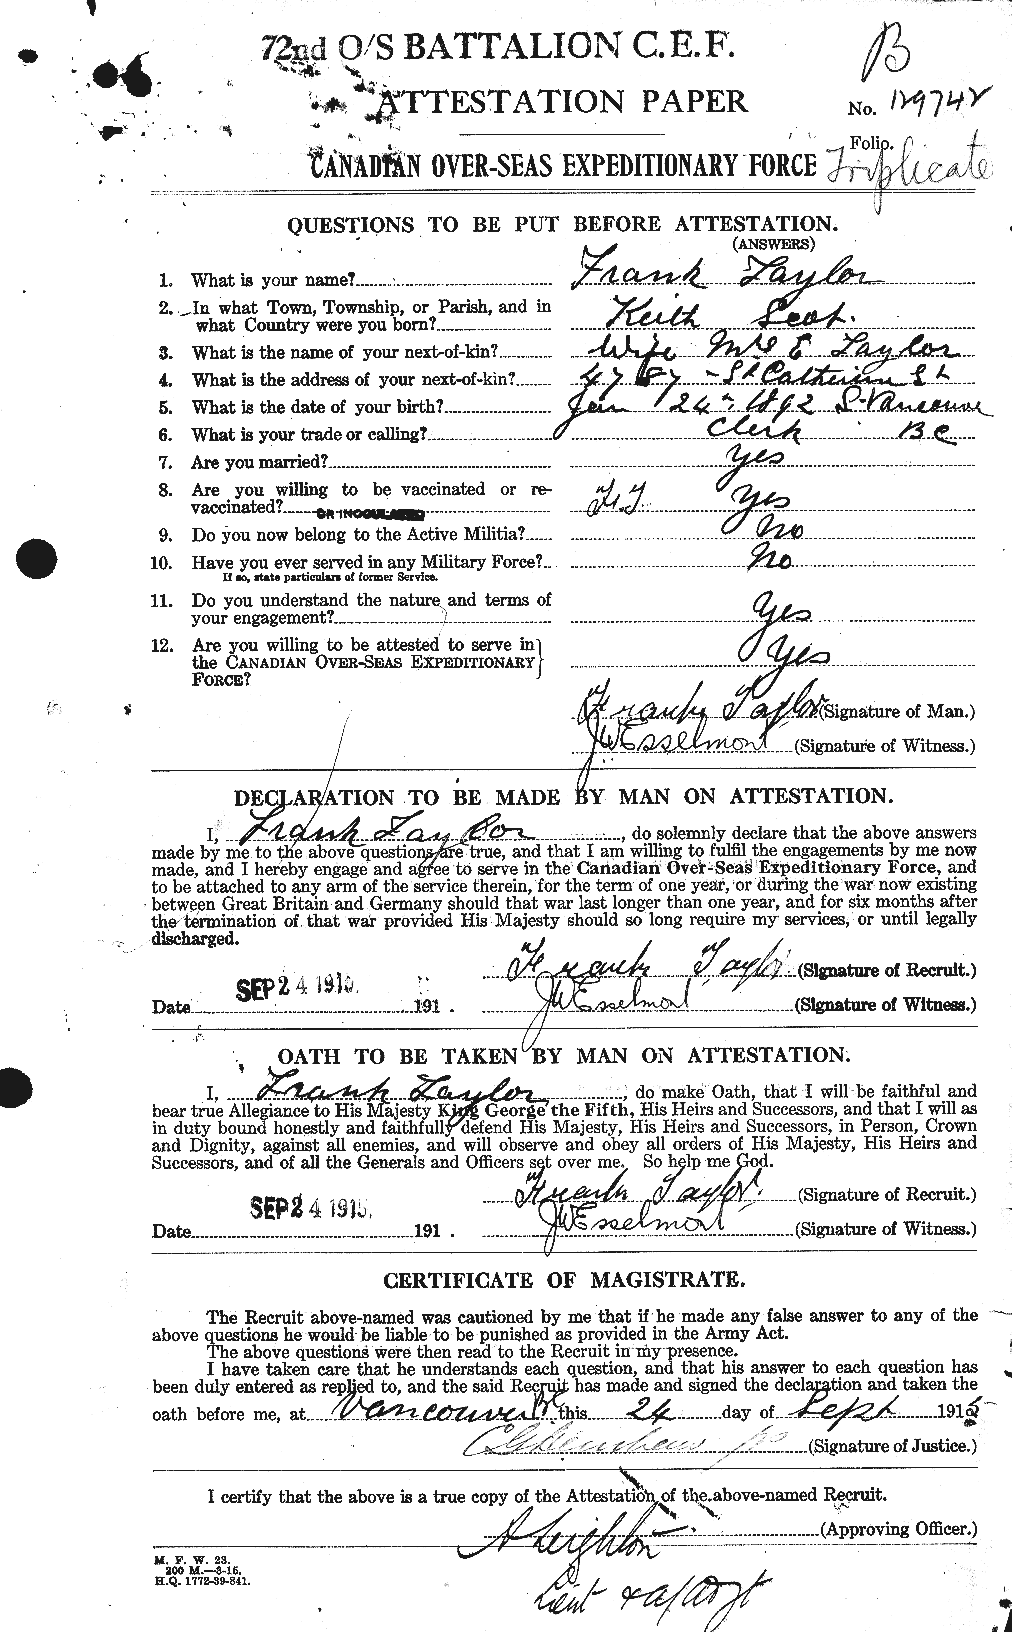 Personnel Records of the First World War - CEF 625700a